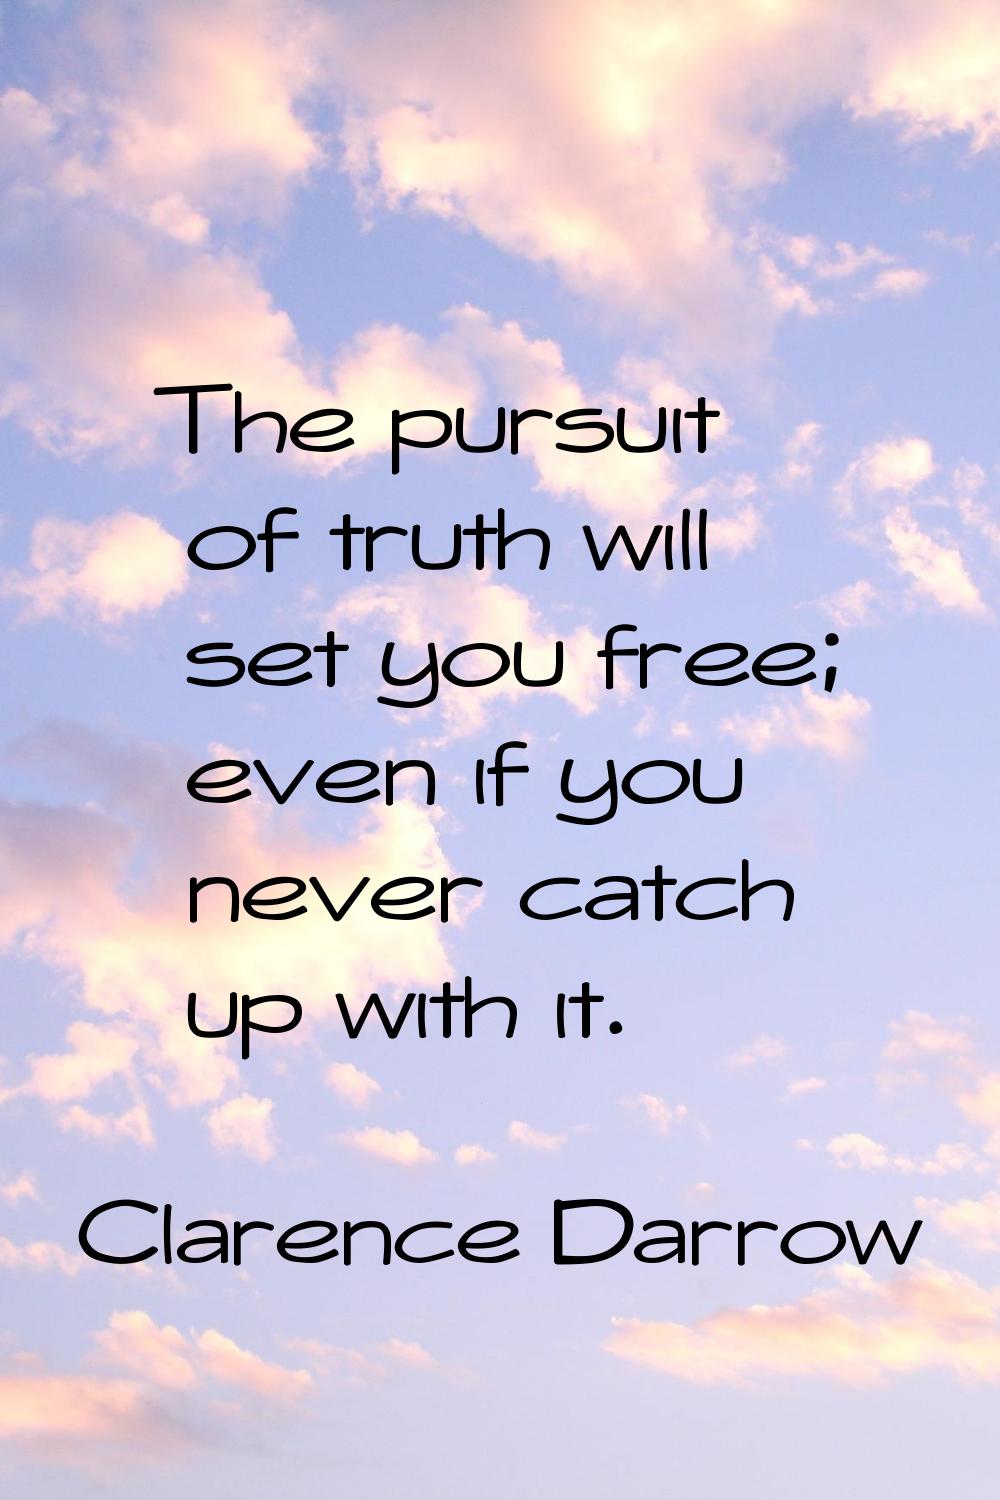 The pursuit of truth will set you free; even if you never catch up with it.